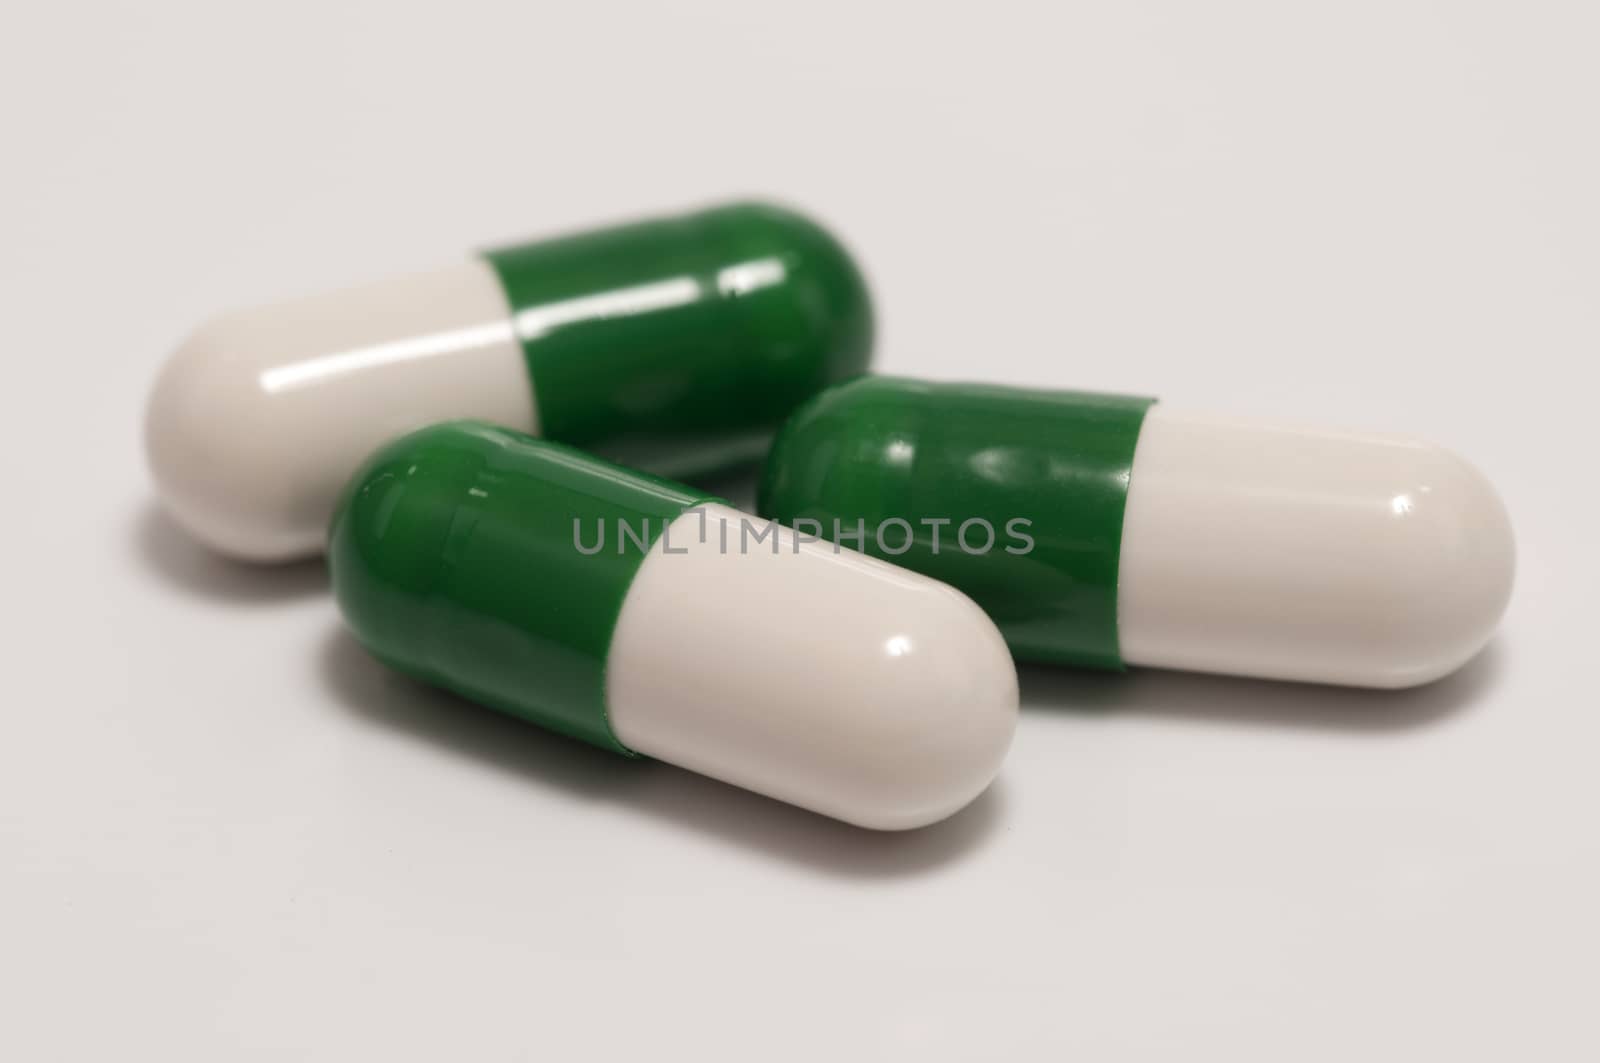 Three capsules or pills on white background